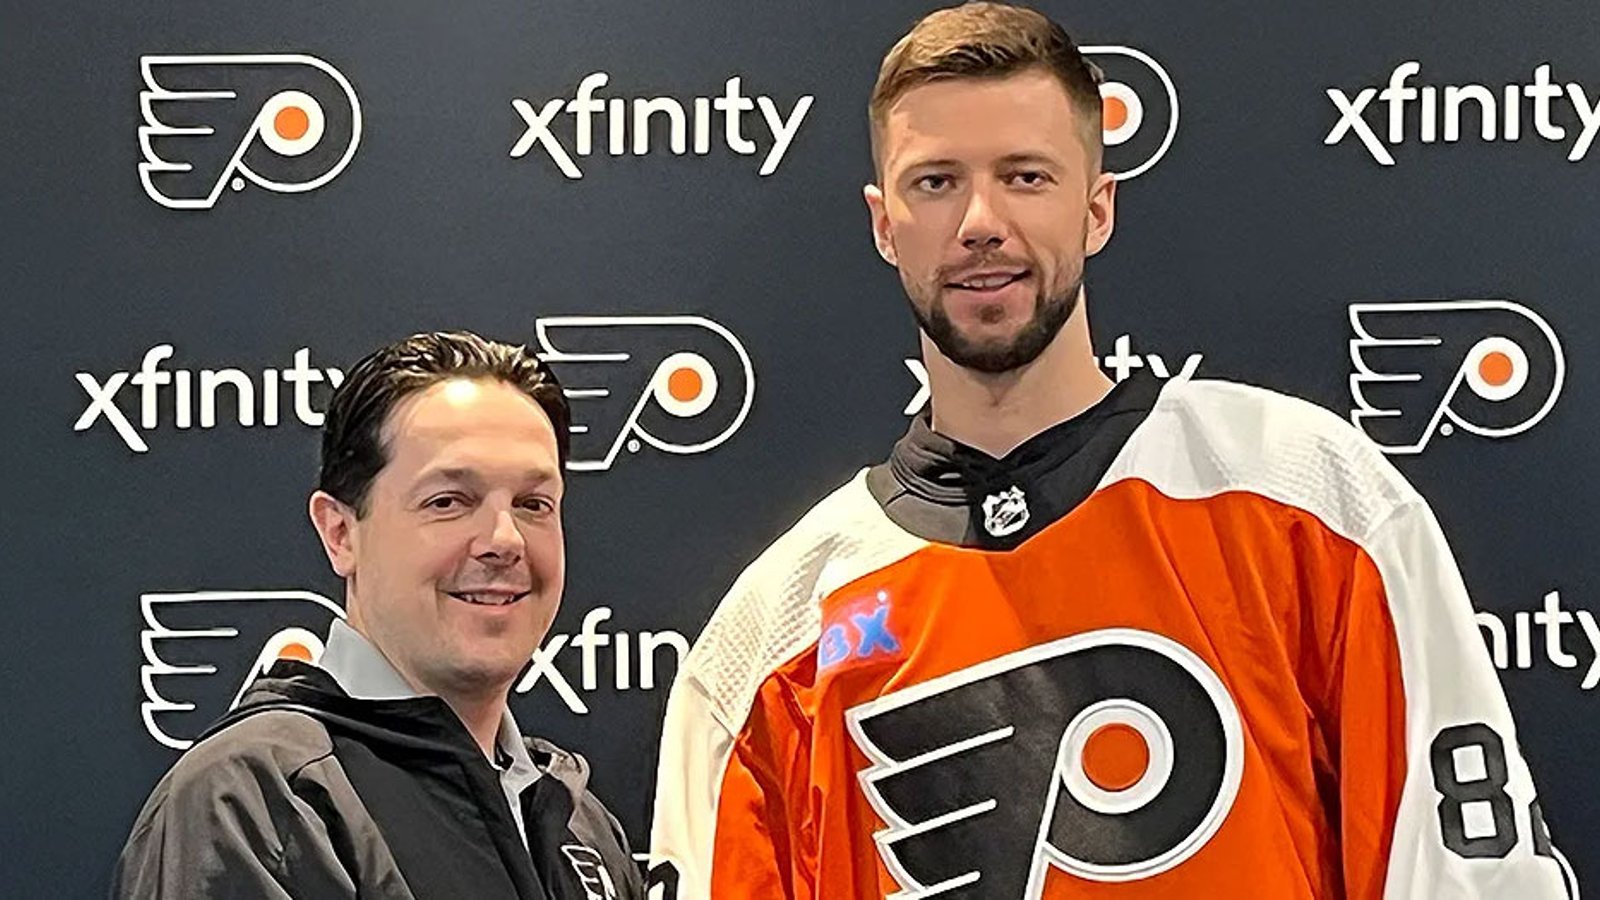 Fedotov signs big contract and Flyers fans aren't happy